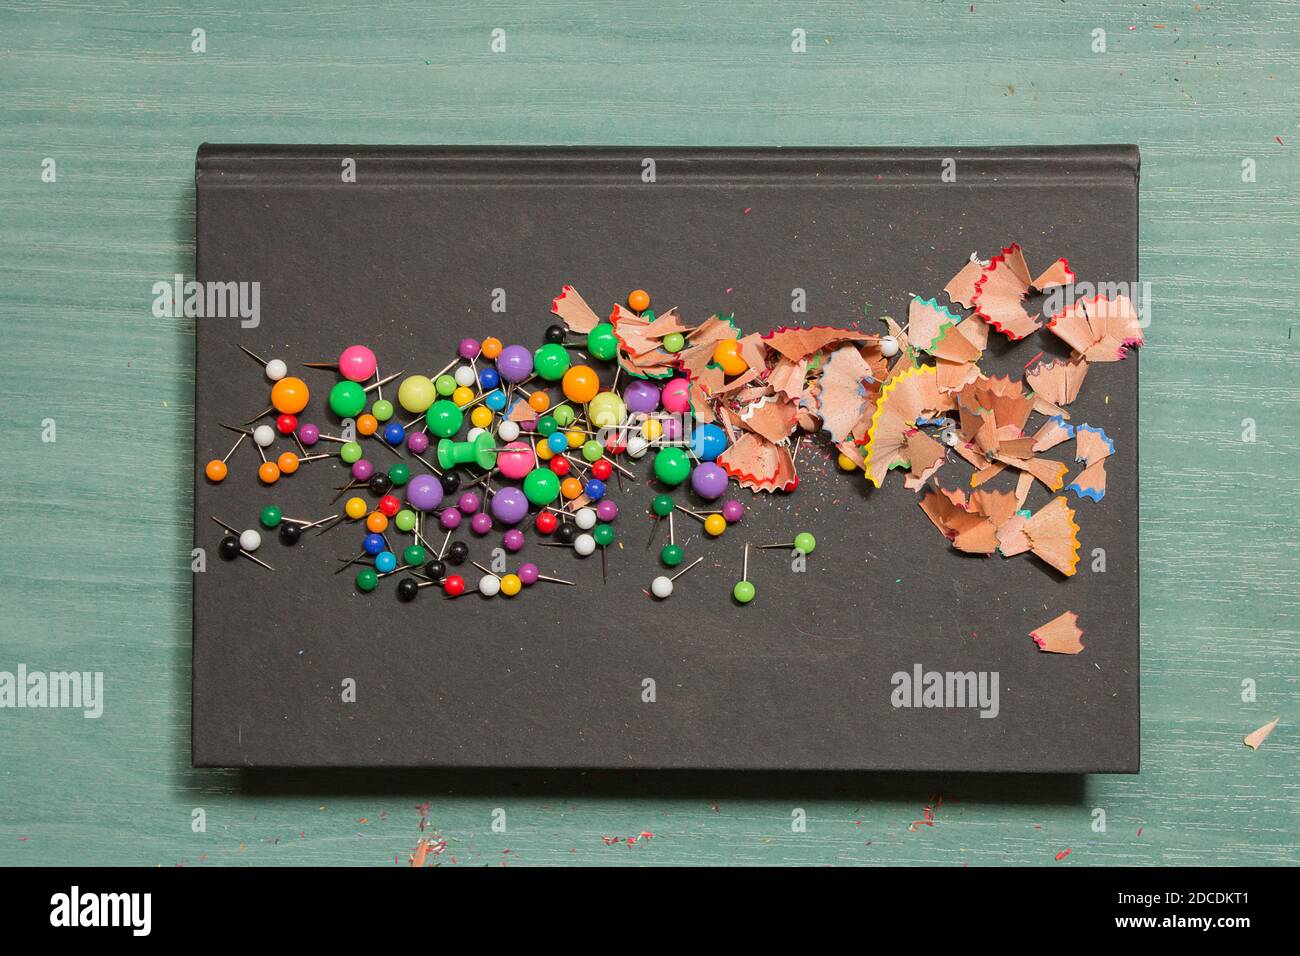 Colorful scraps of school supplies on a black cover book on a wooden table. Stock Photo